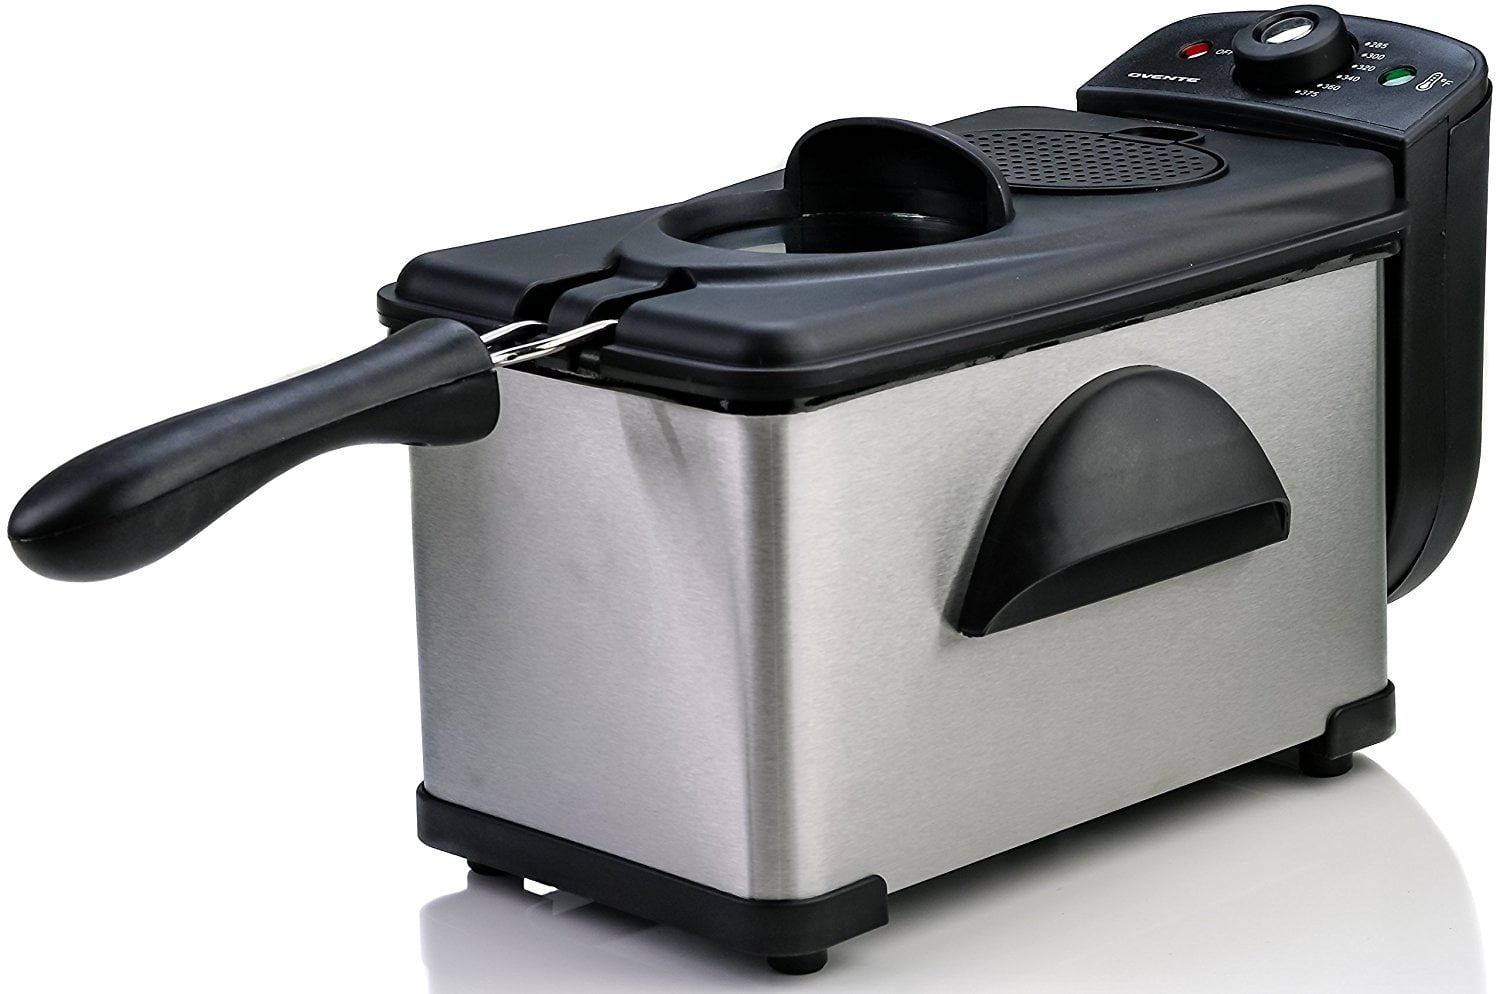 OVENTE Electric Deep Fryer 1.5 Liter Capacity, Lid with Viewing Window,  Removable Frying Basket, Adjustable Temperature, Cool Touch Handles and  Easy to Clean Stainless Steel Body, Silver FDM1501BR 